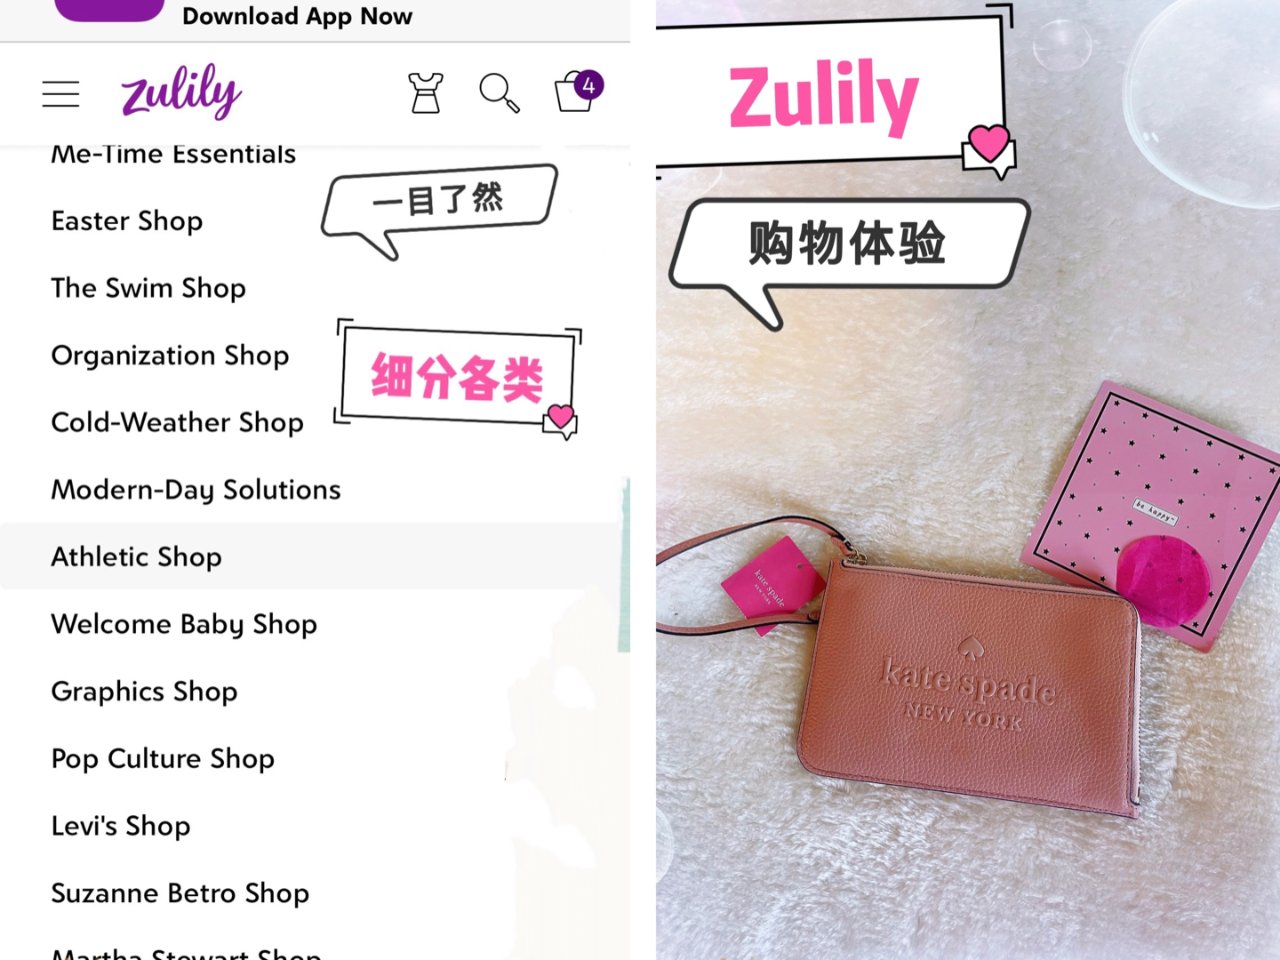 Zulily购物平台体验...